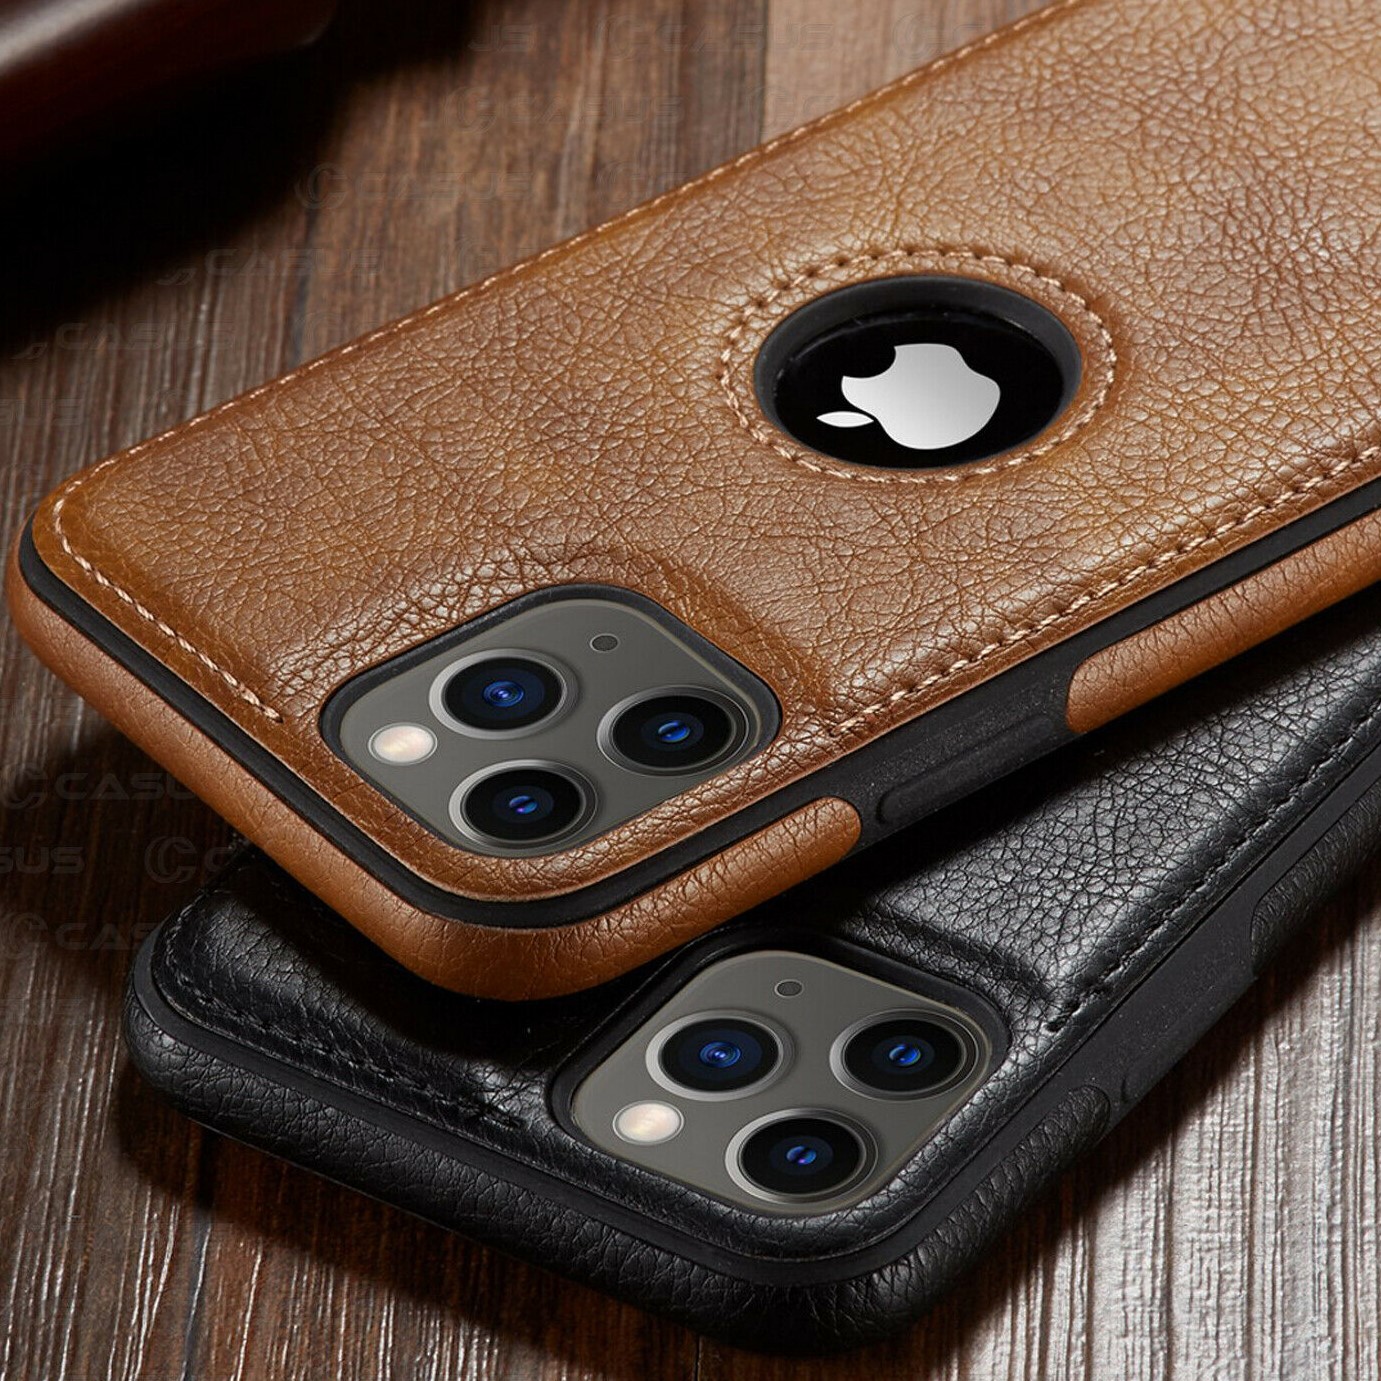 Luxury Leather Stitching Case for iPhone COMPARISON!